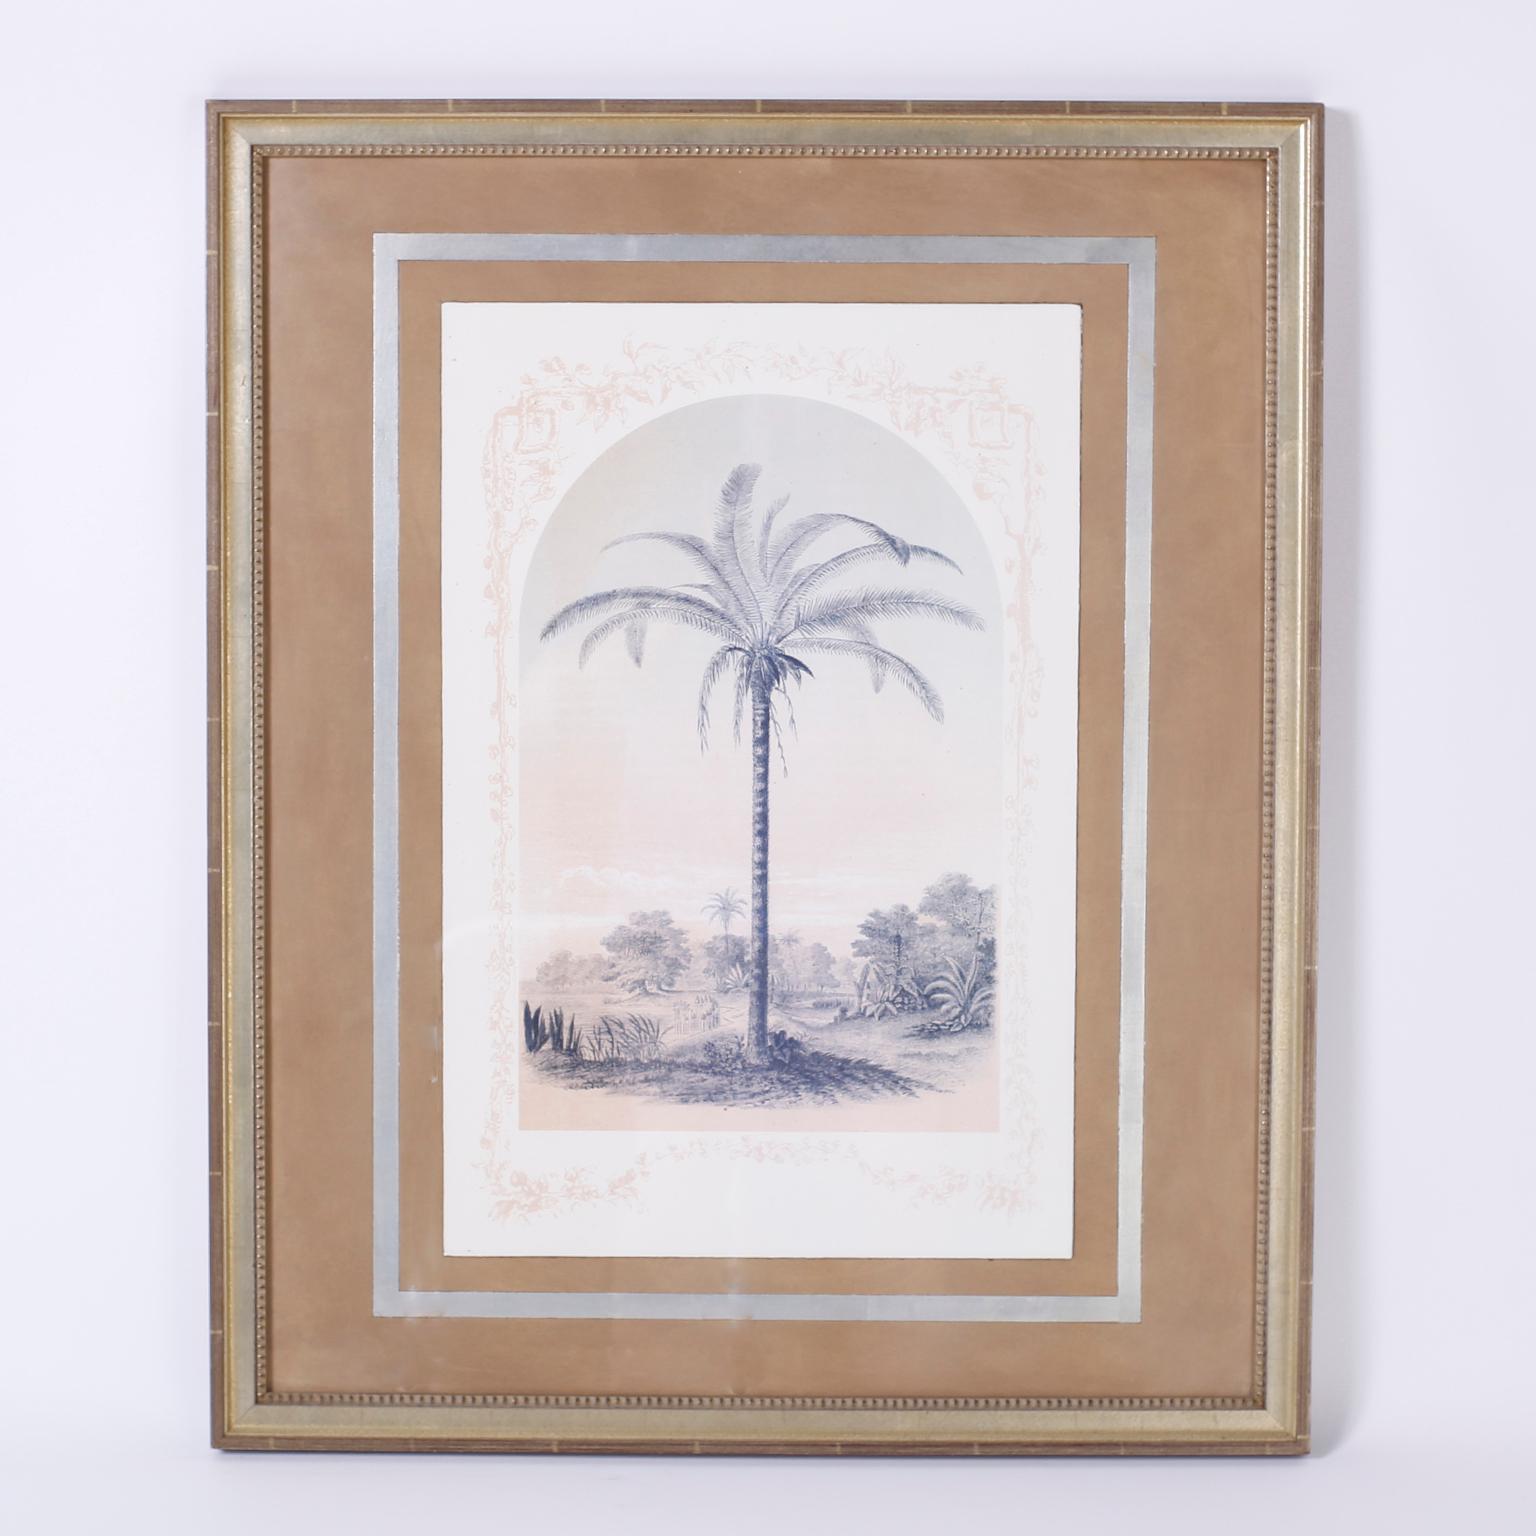 English Pair of Framed and Matted Palm Tree Lithographs